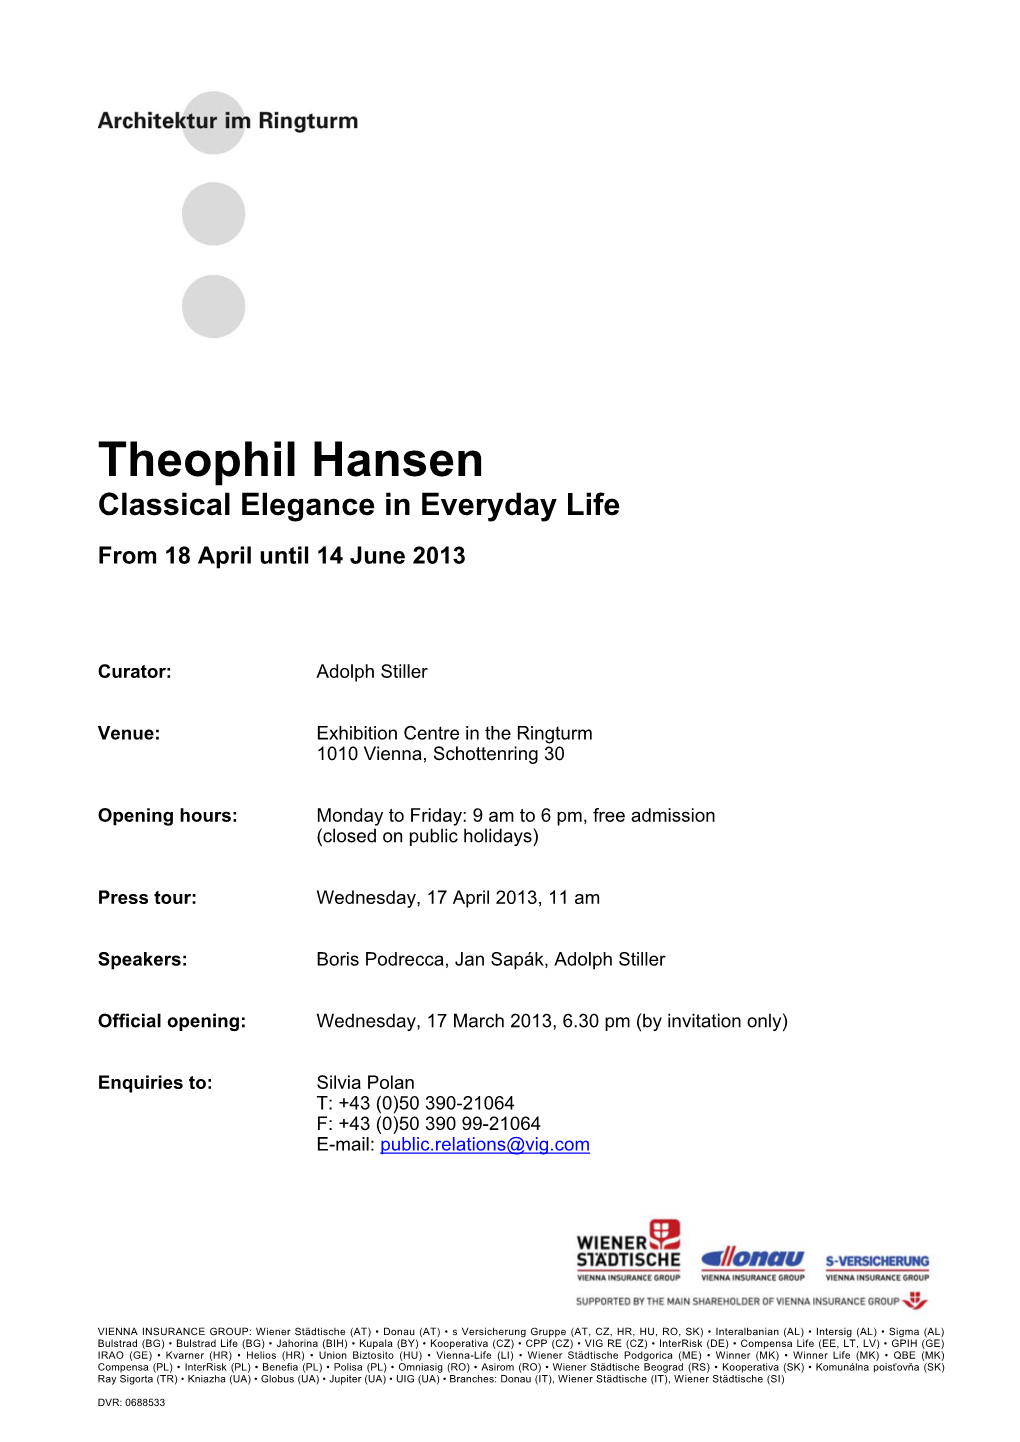 Theophil Hansen Classical Elegance in Everyday Life